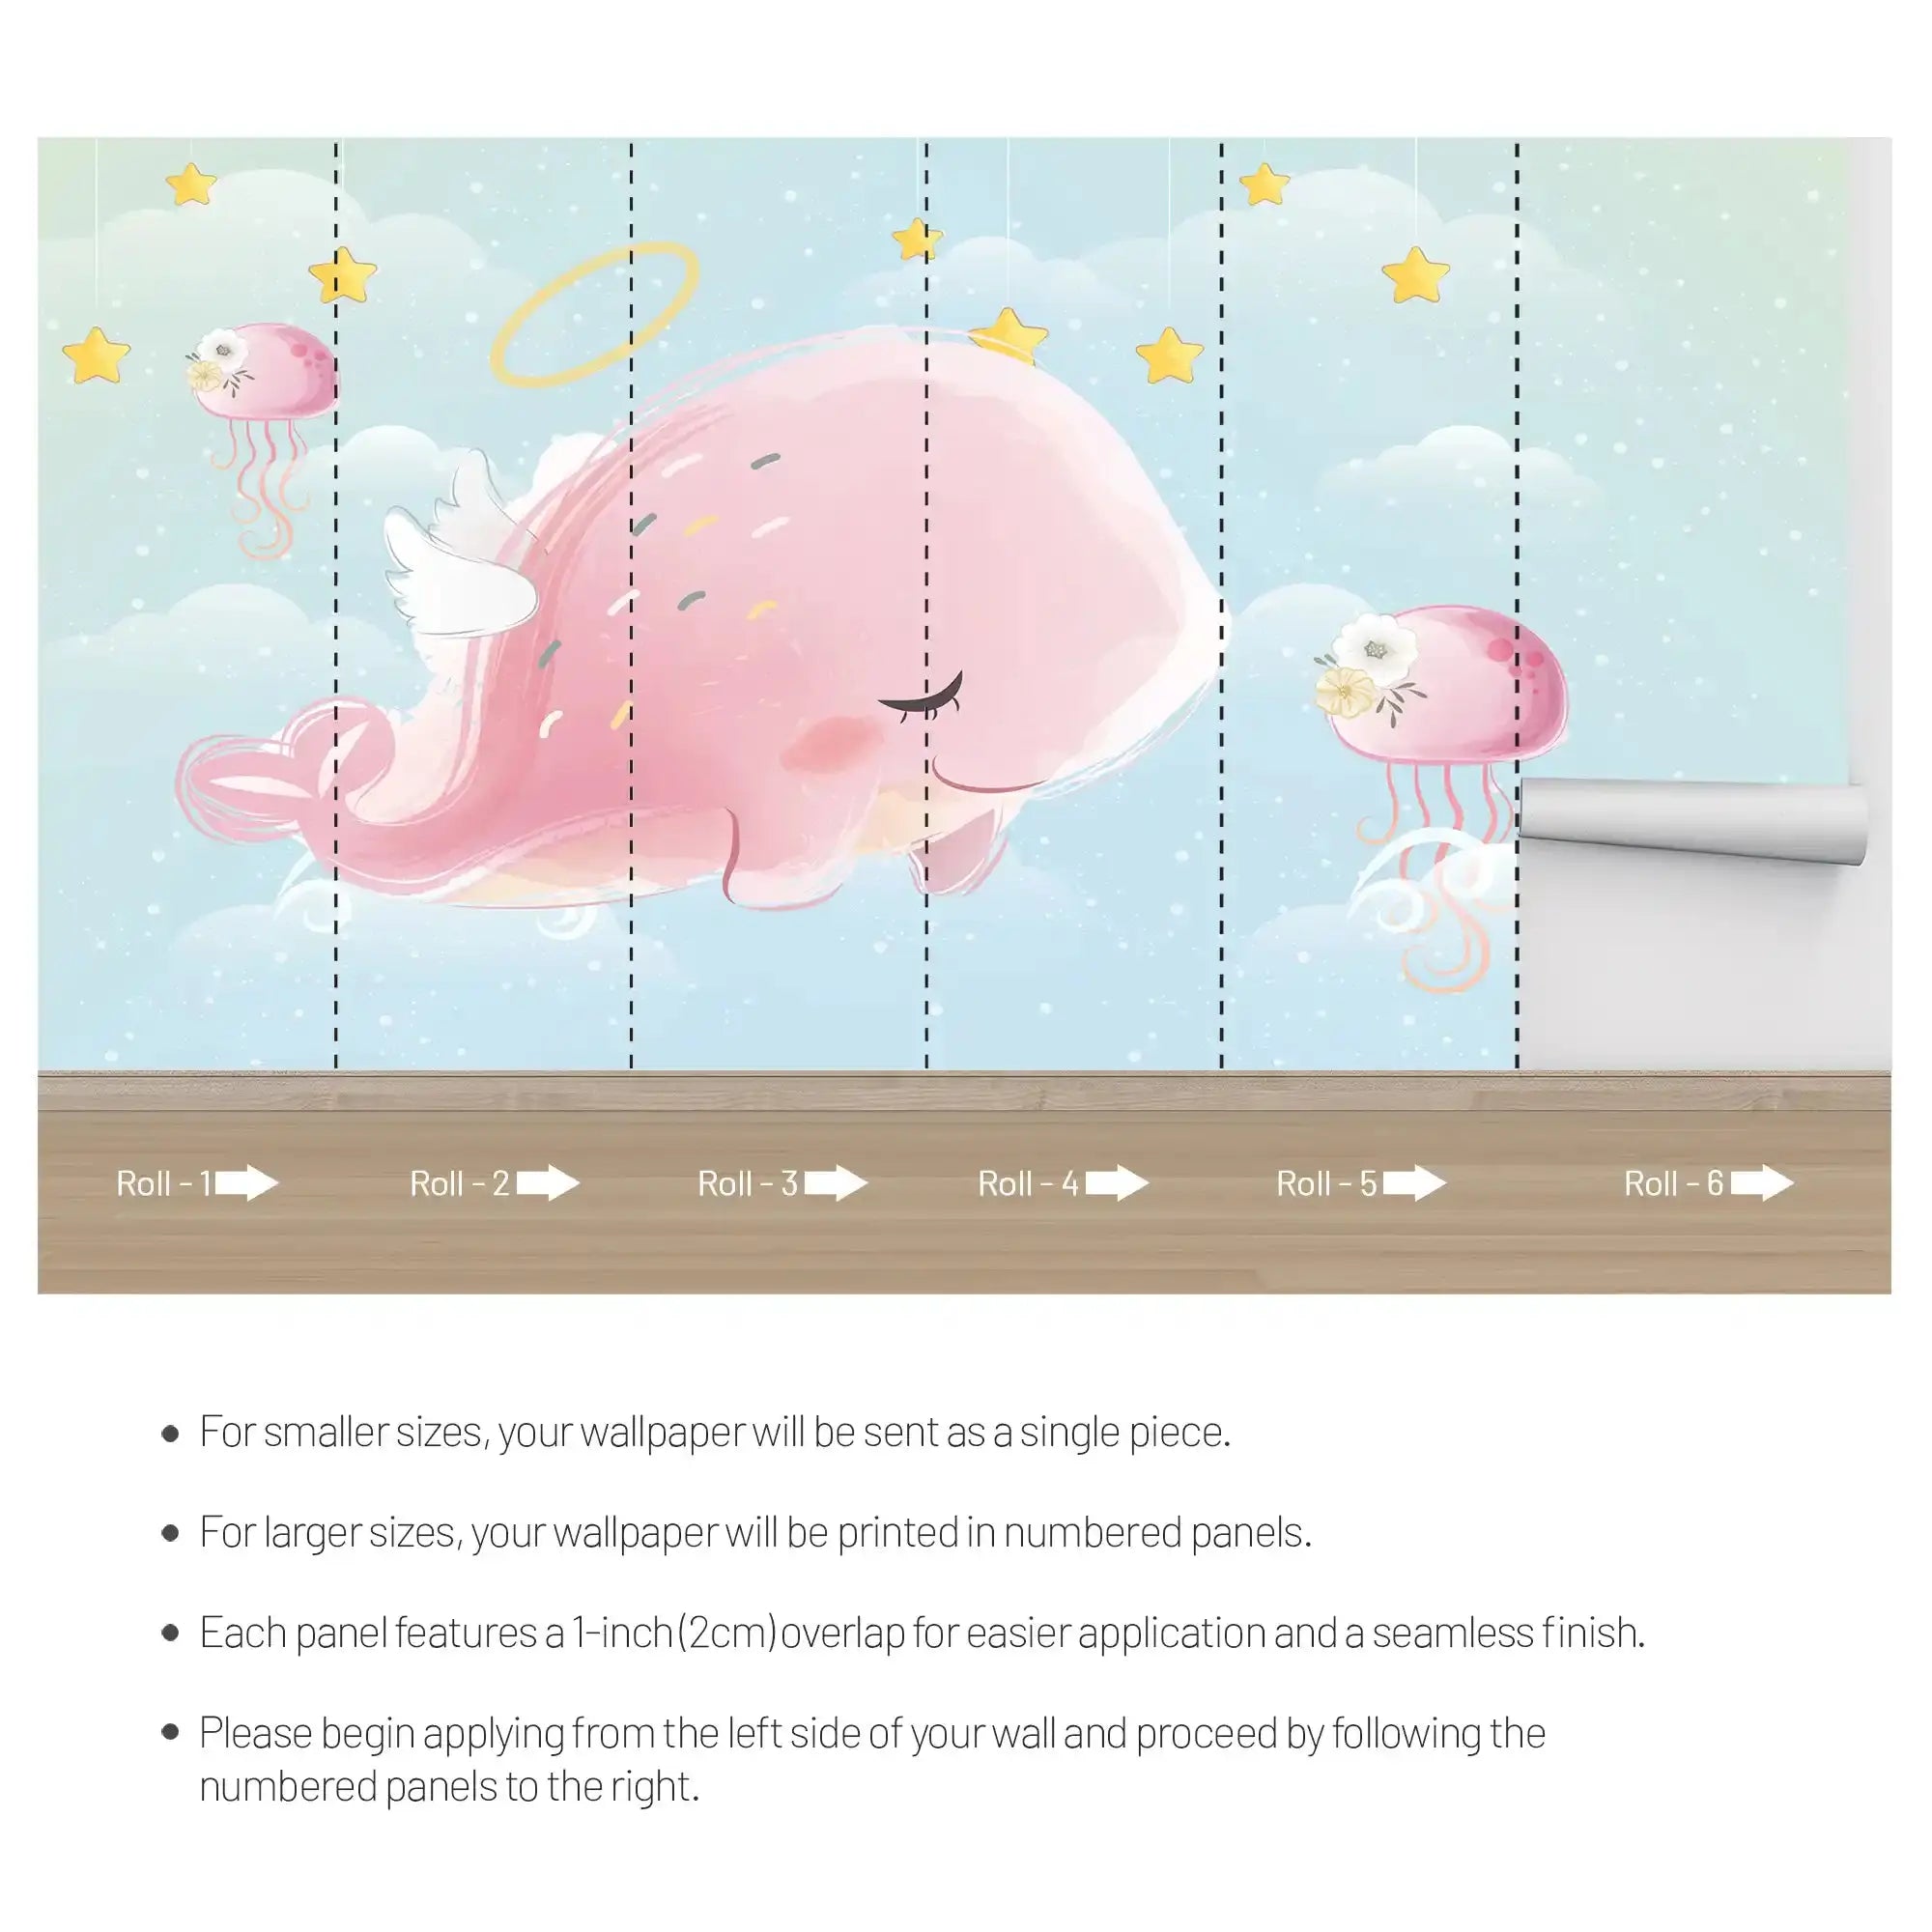 6017 / Baby Room Self Adhesive Wallpaper: Pastel Pink Whale and Starfish, Perfect for DIY Nursery Decor - Artevella